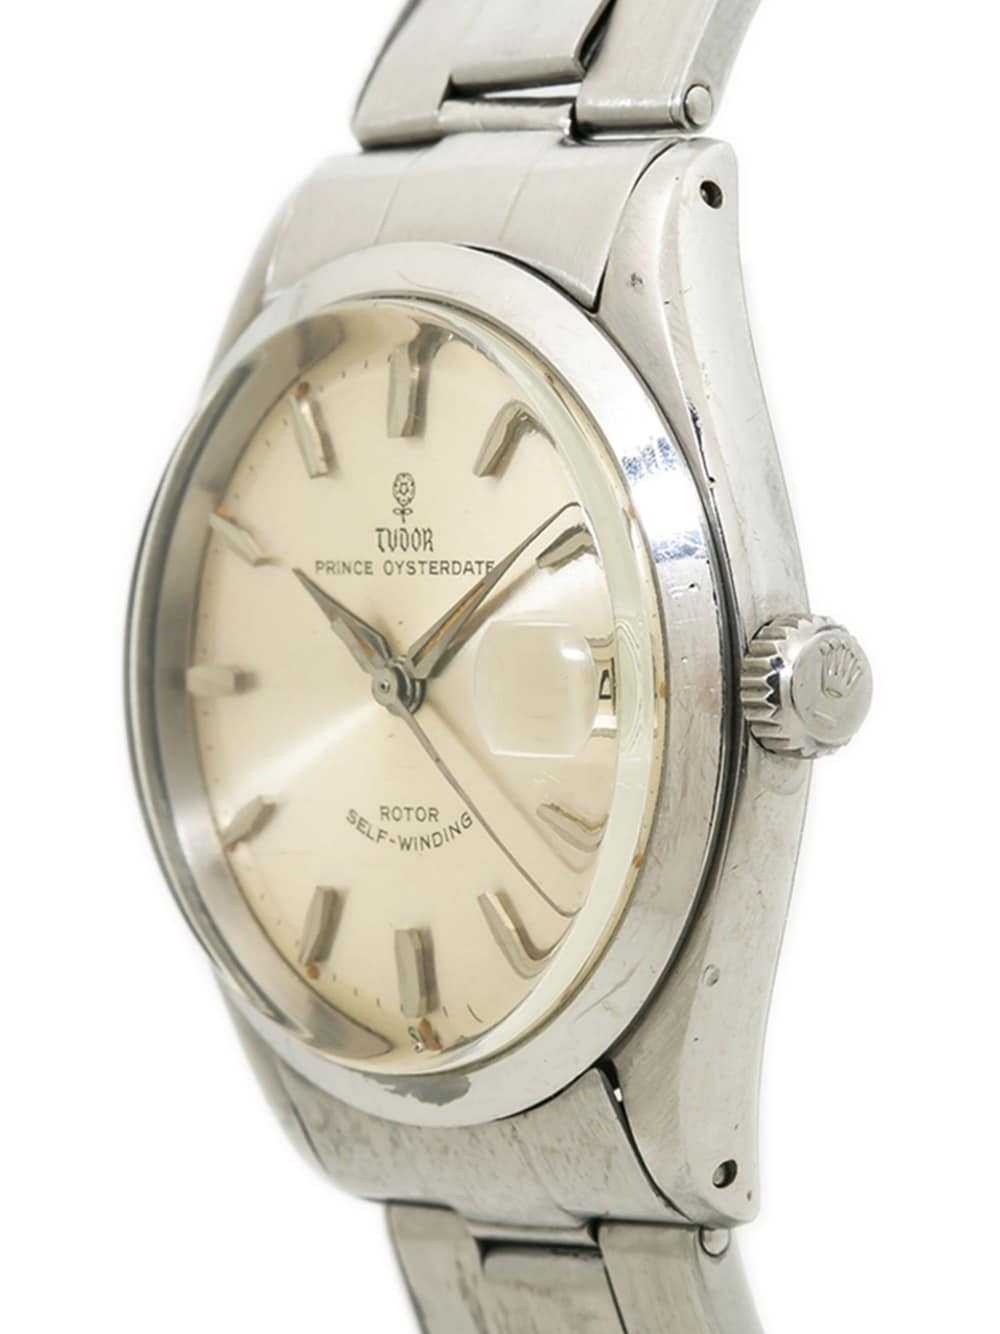 TUDOR pre-owned Prince OysterDate 34mm - Silver - image 3